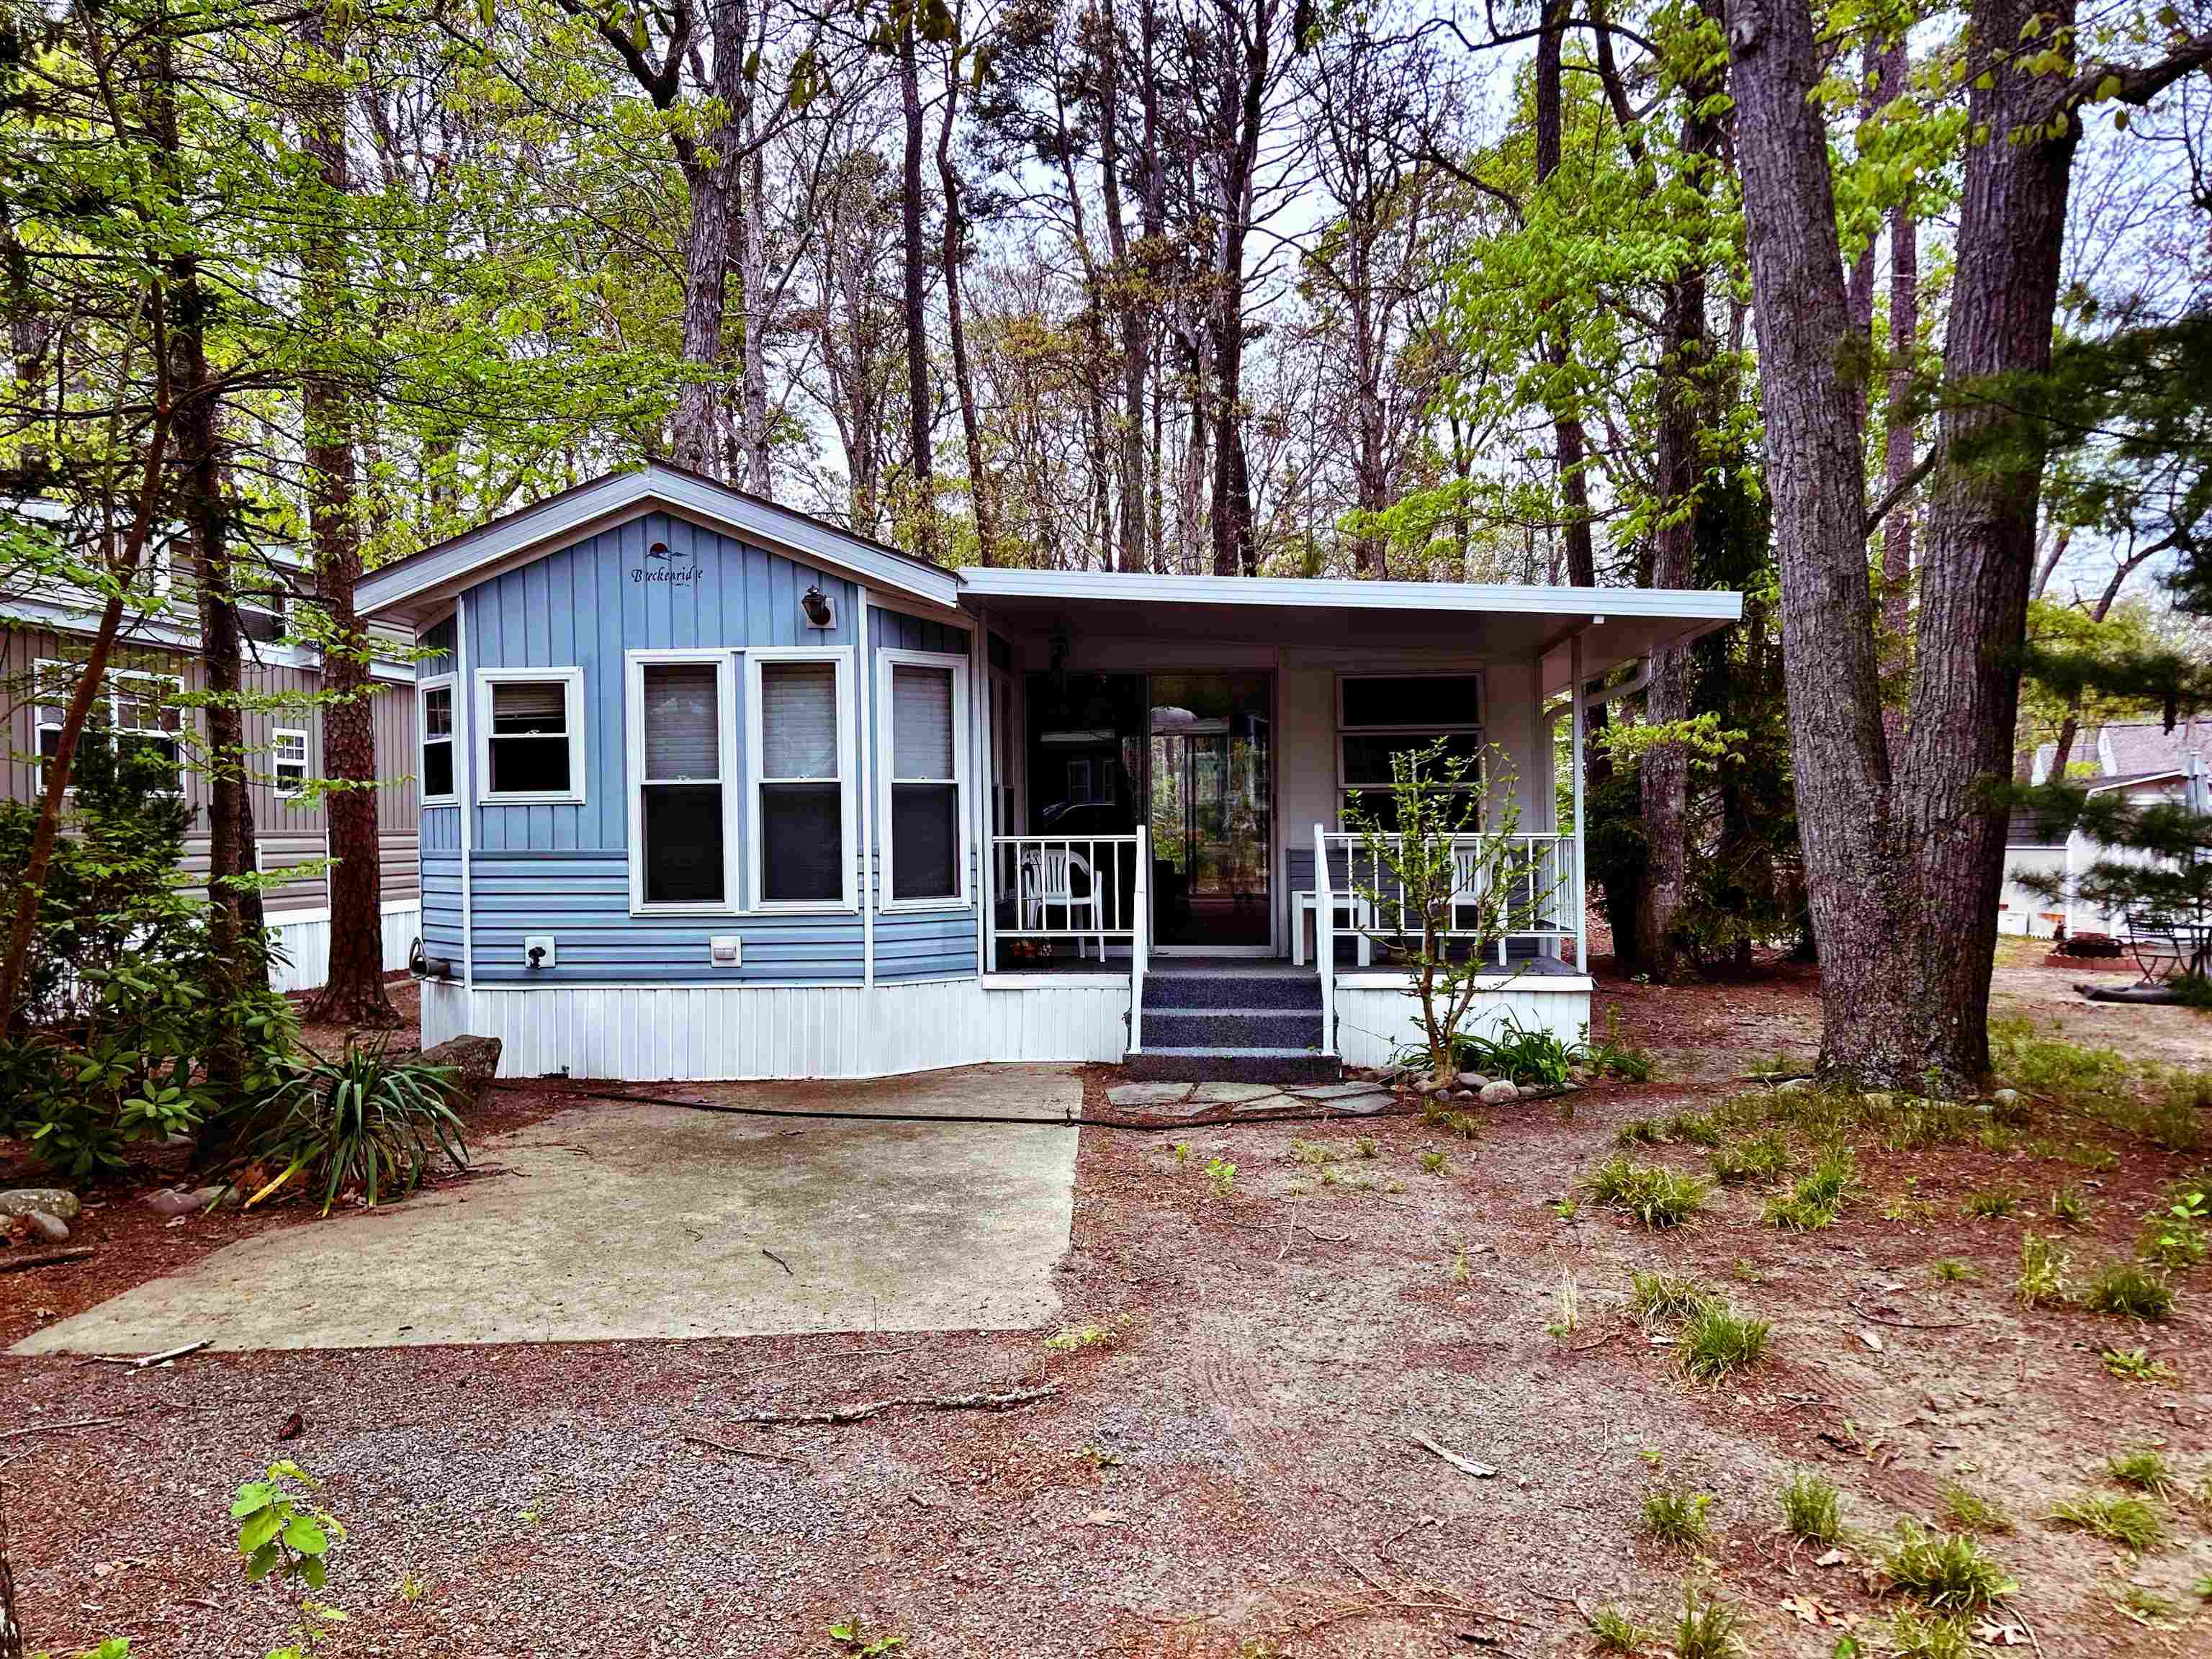 a view of a house with a yard porch and sitting area